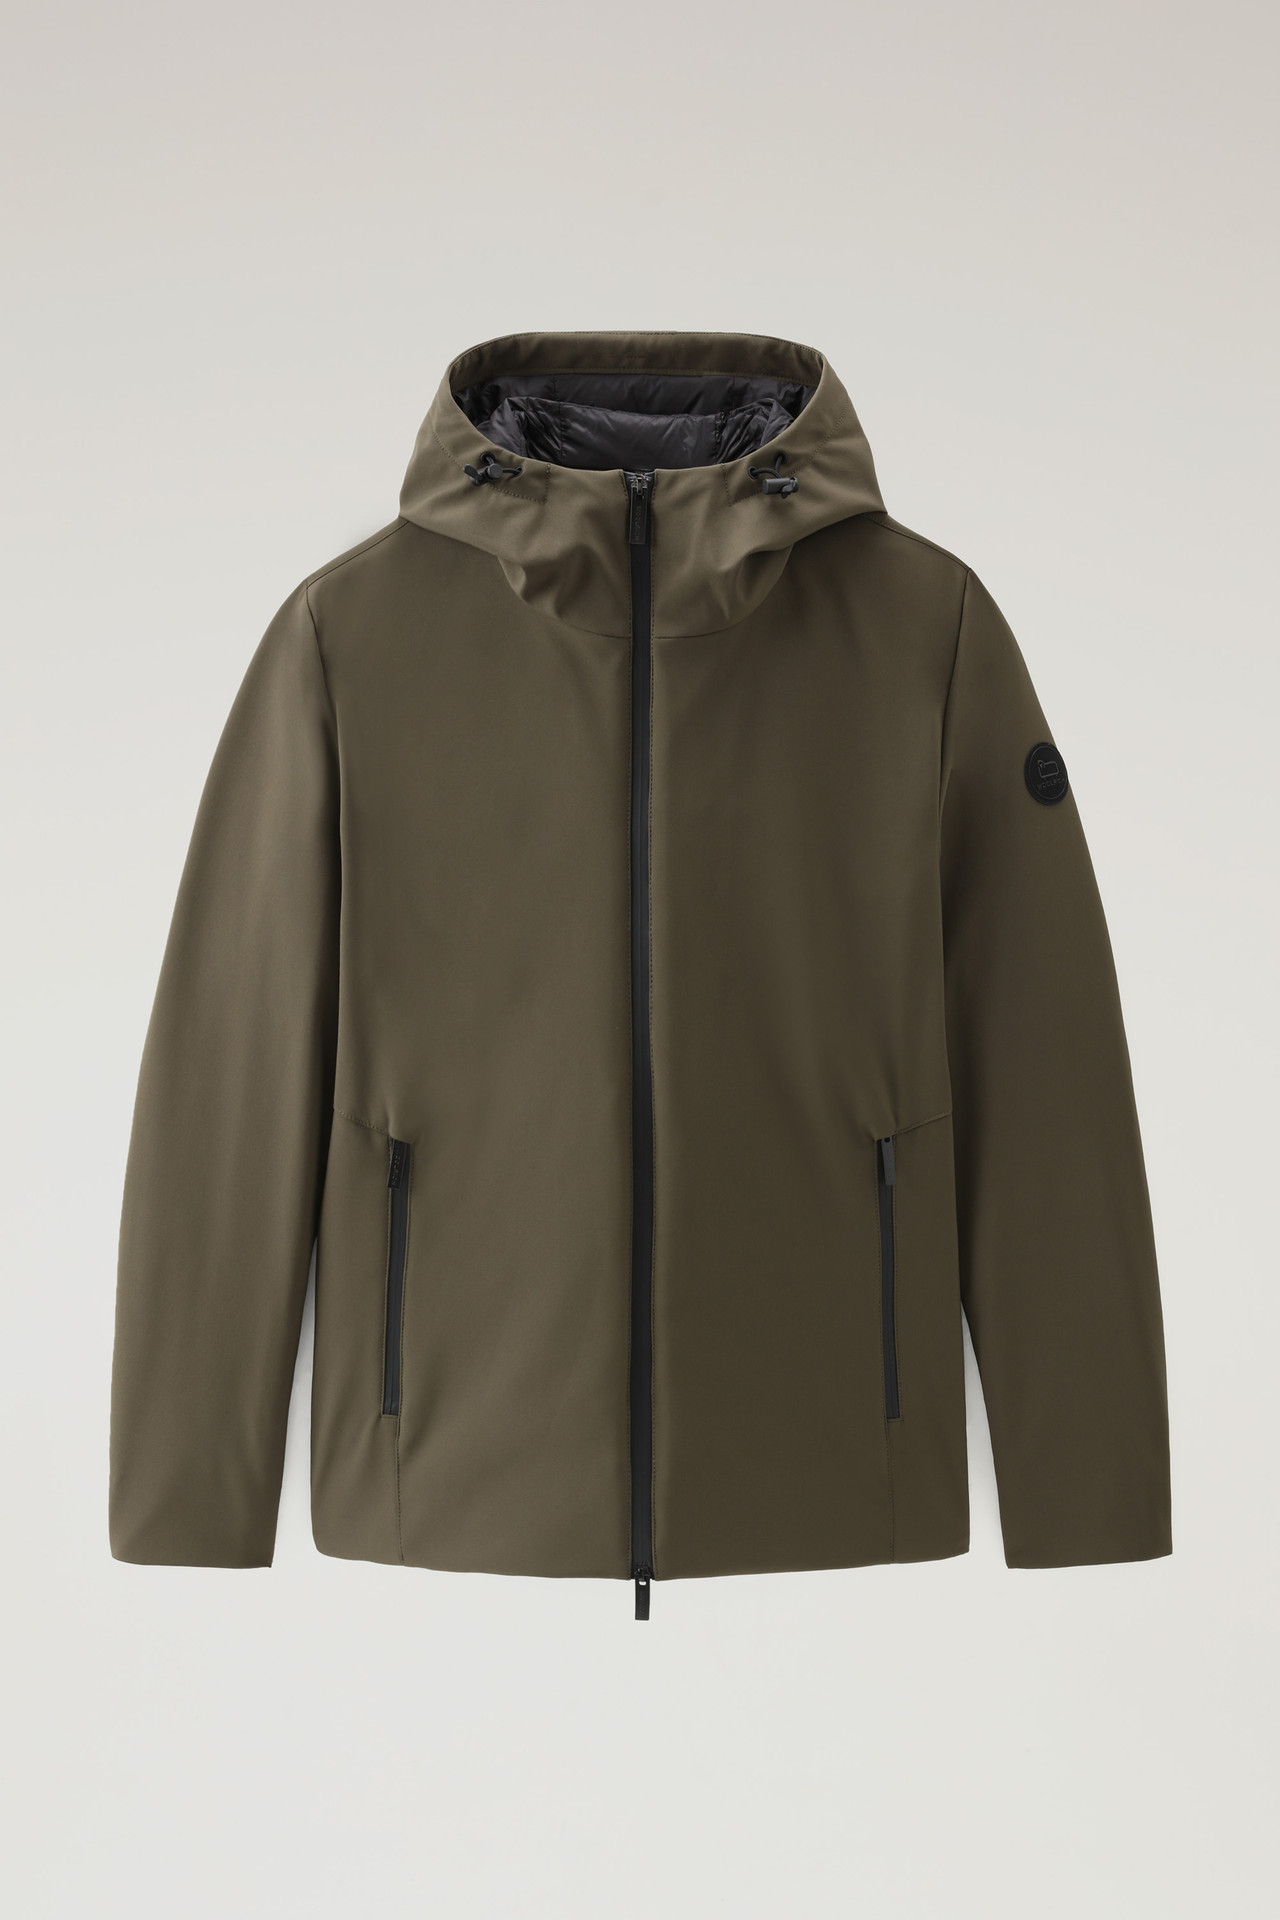 Woolrich – Pacific Softshell – Groen